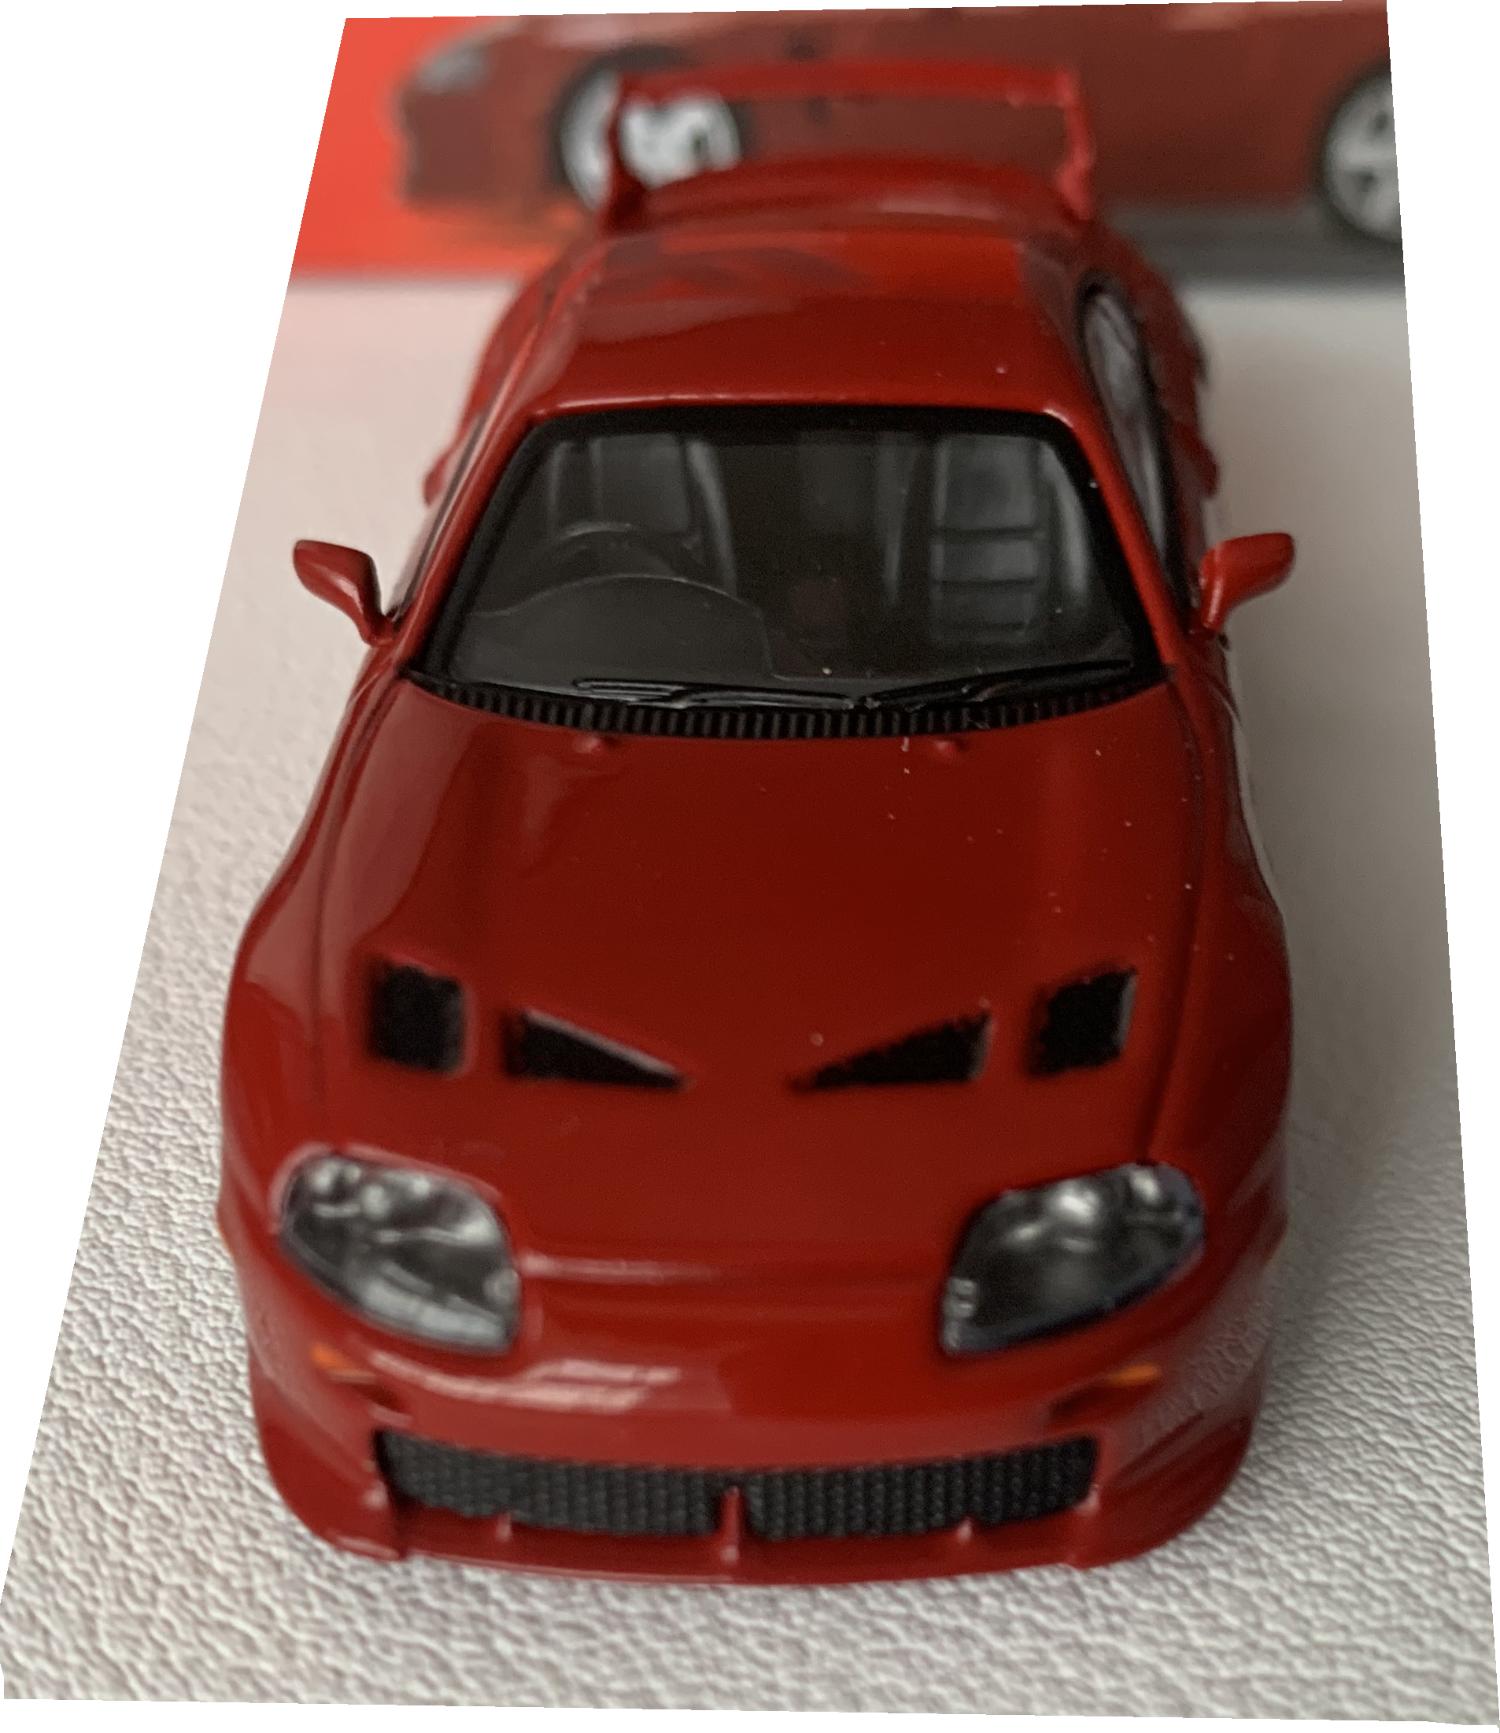 Toyota TRD 3000GT in renaissance red 1:64 scale model from Mini GT